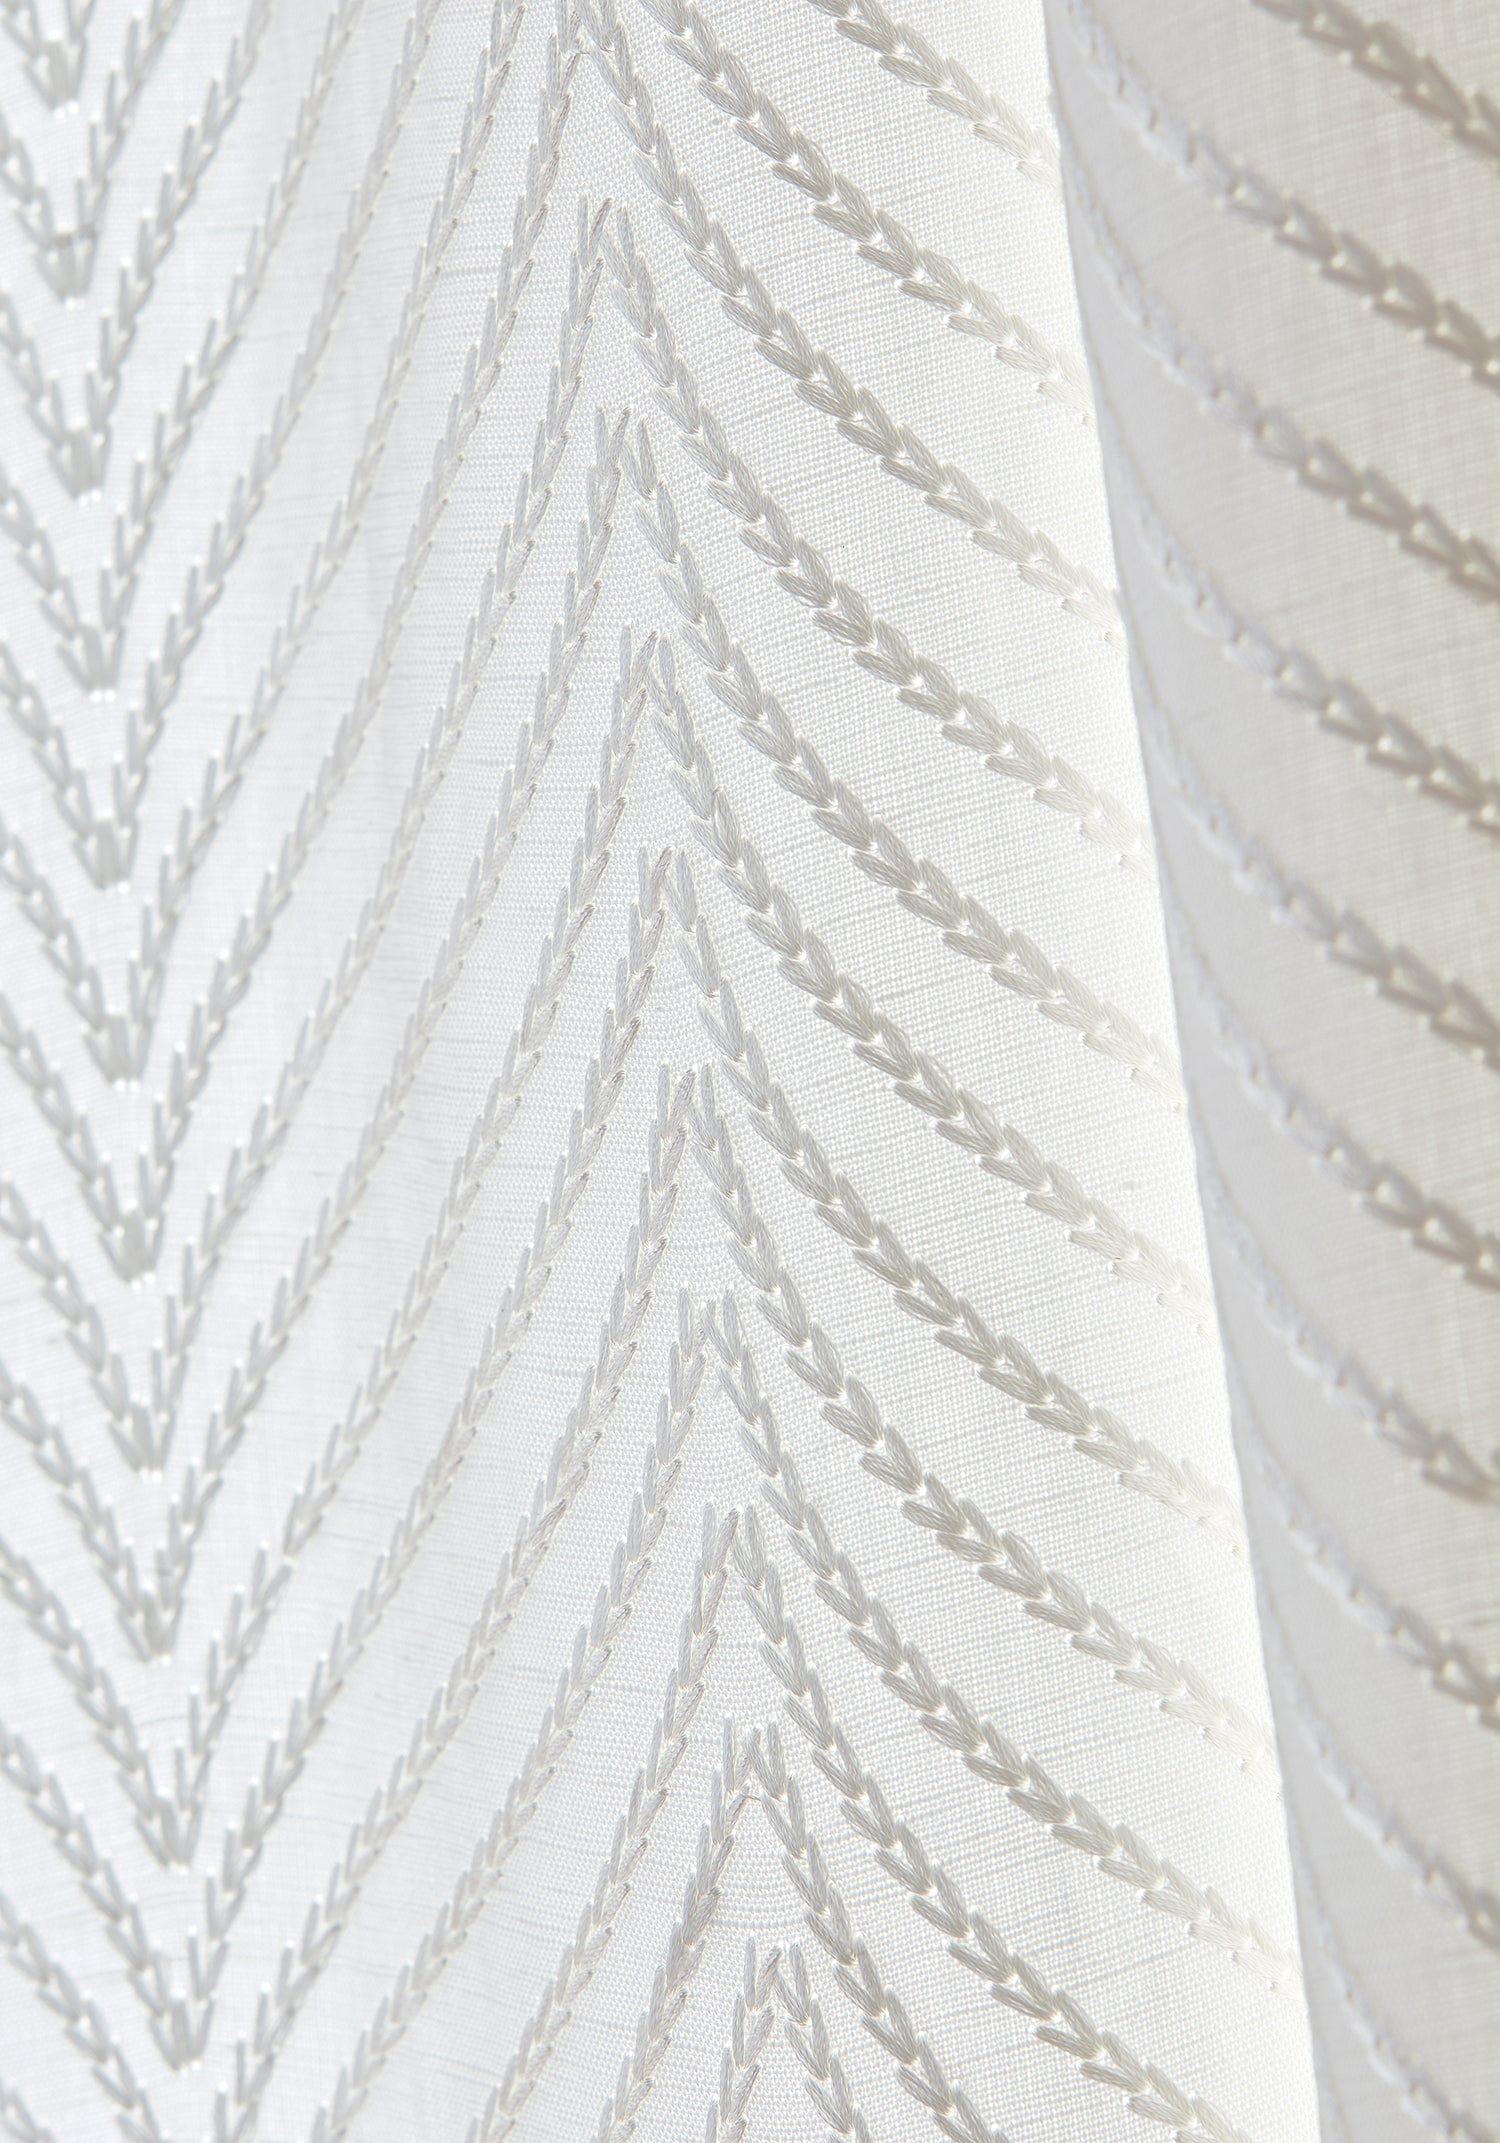 Detailed view of Drapery in Clayton Herringbone woven fabric in ivory color variant by Thibaut in the Dynasty collection - pattern number W775444